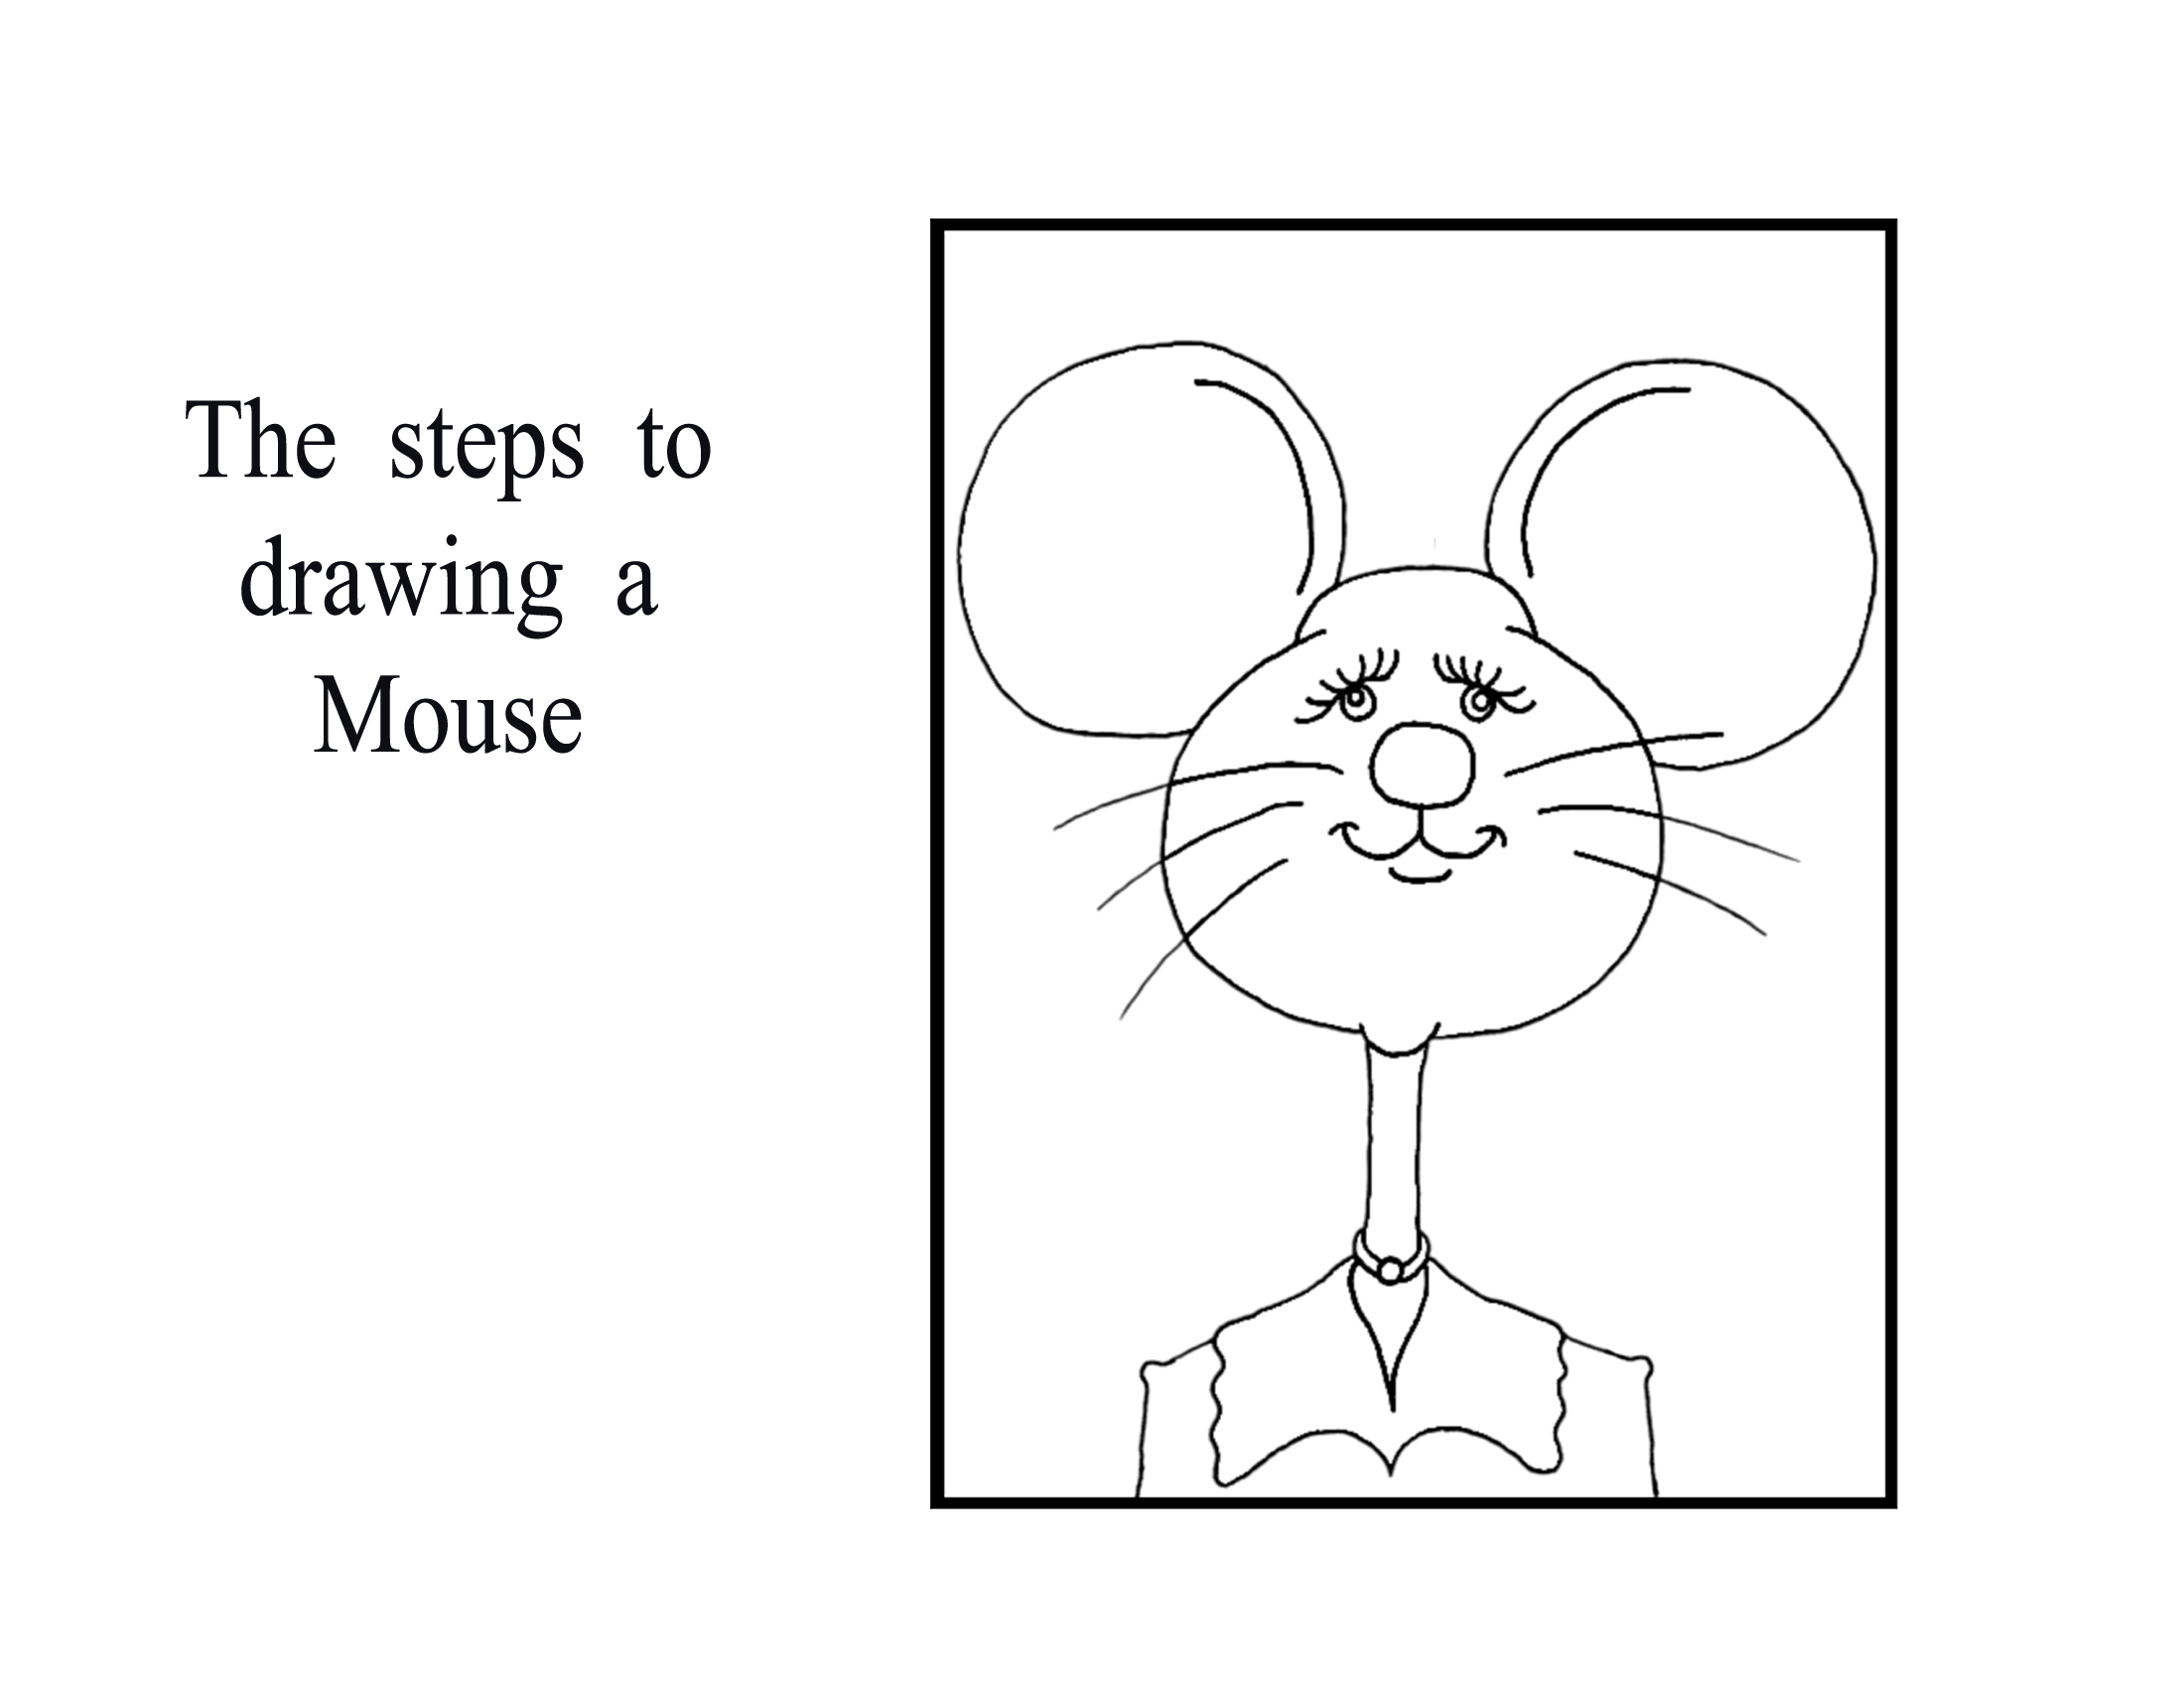 How to draw a mouse.